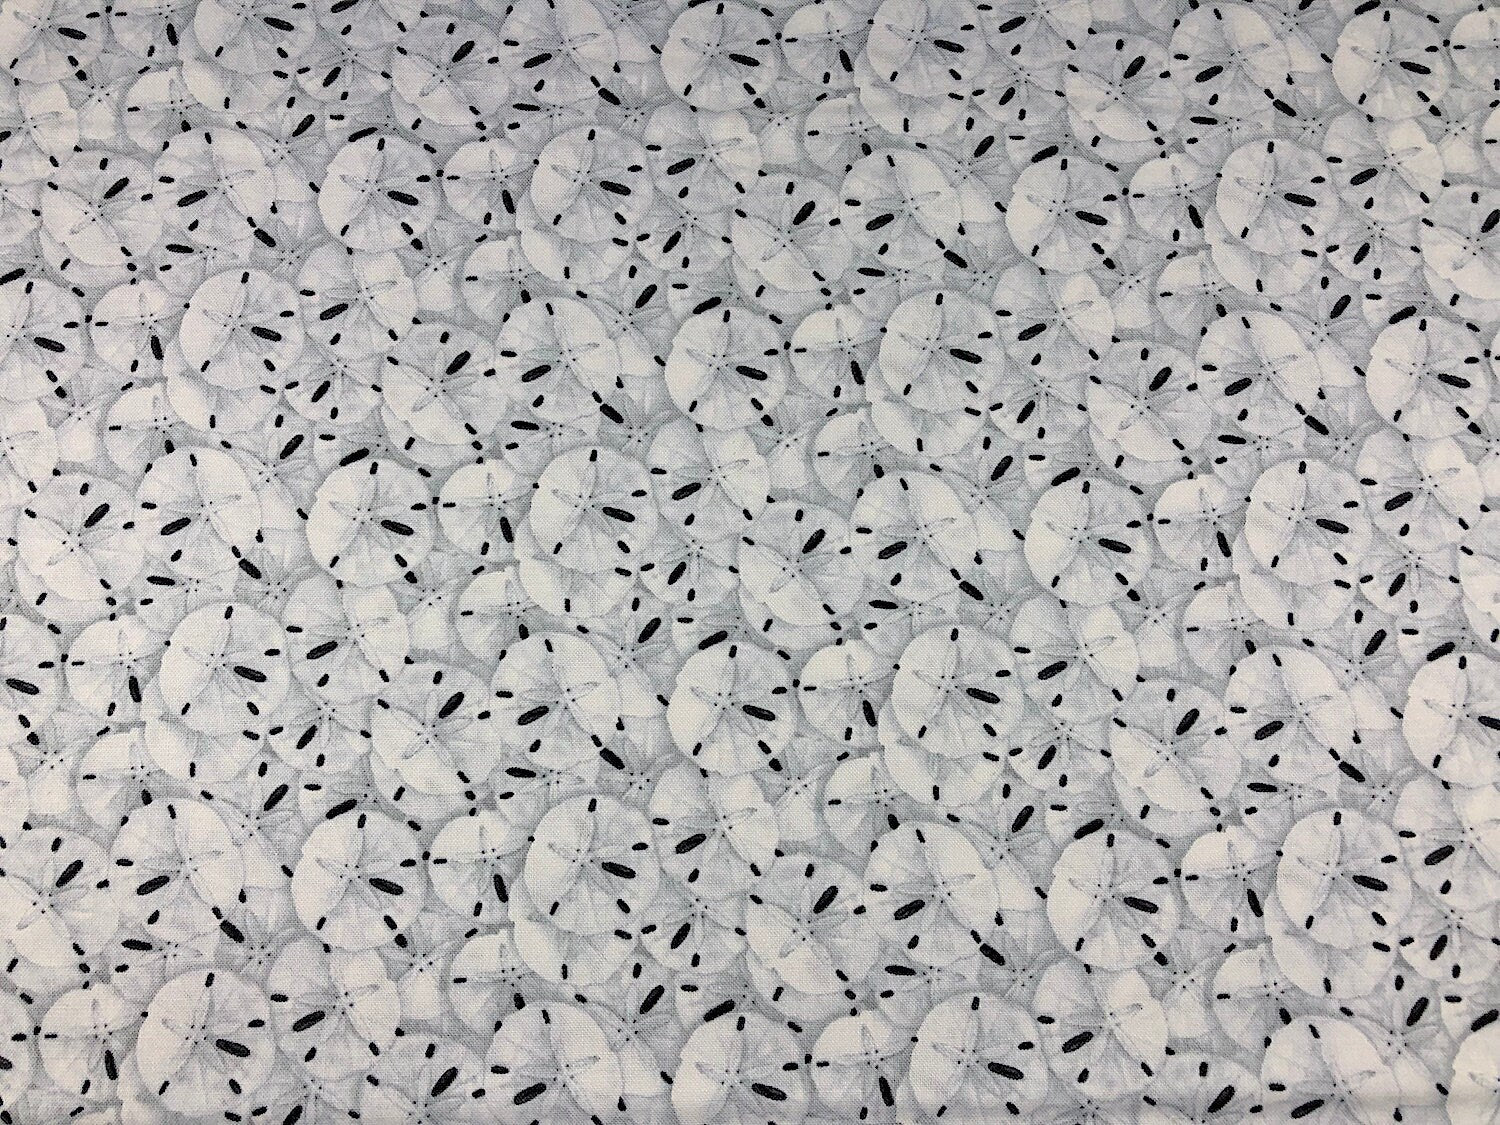 Cotton fabric covered with sand dollars.